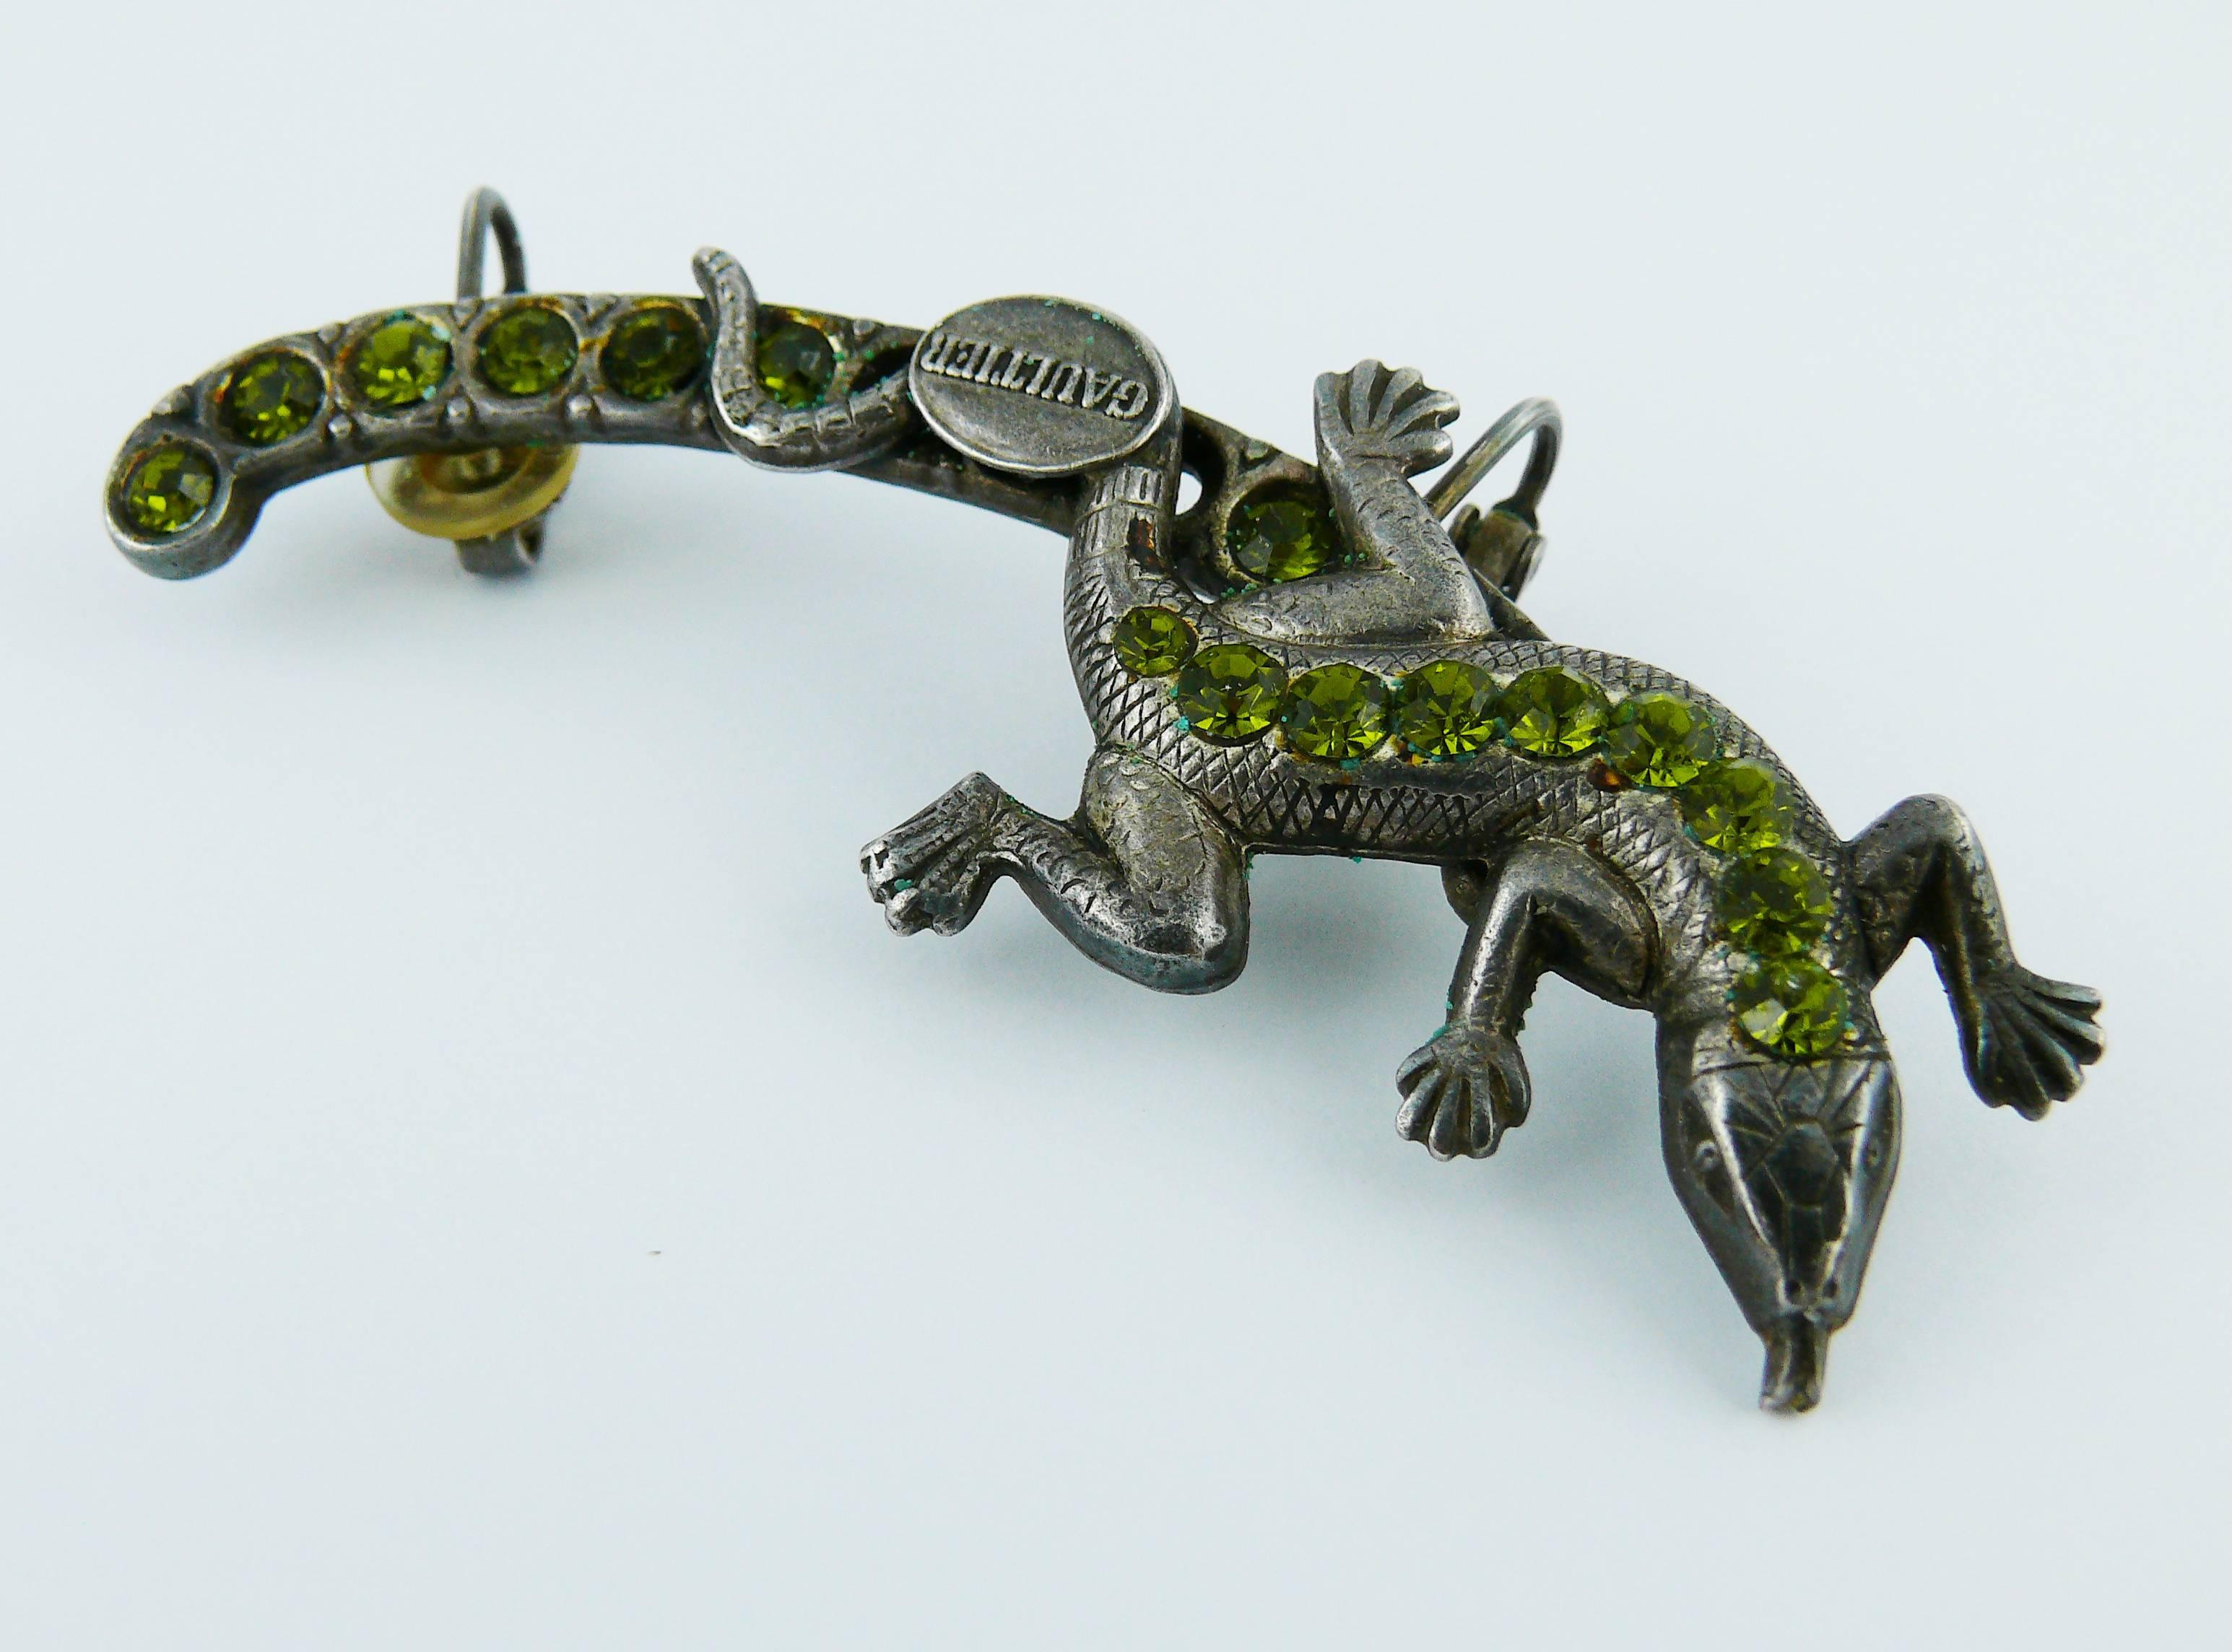 jewelled lizards for sale